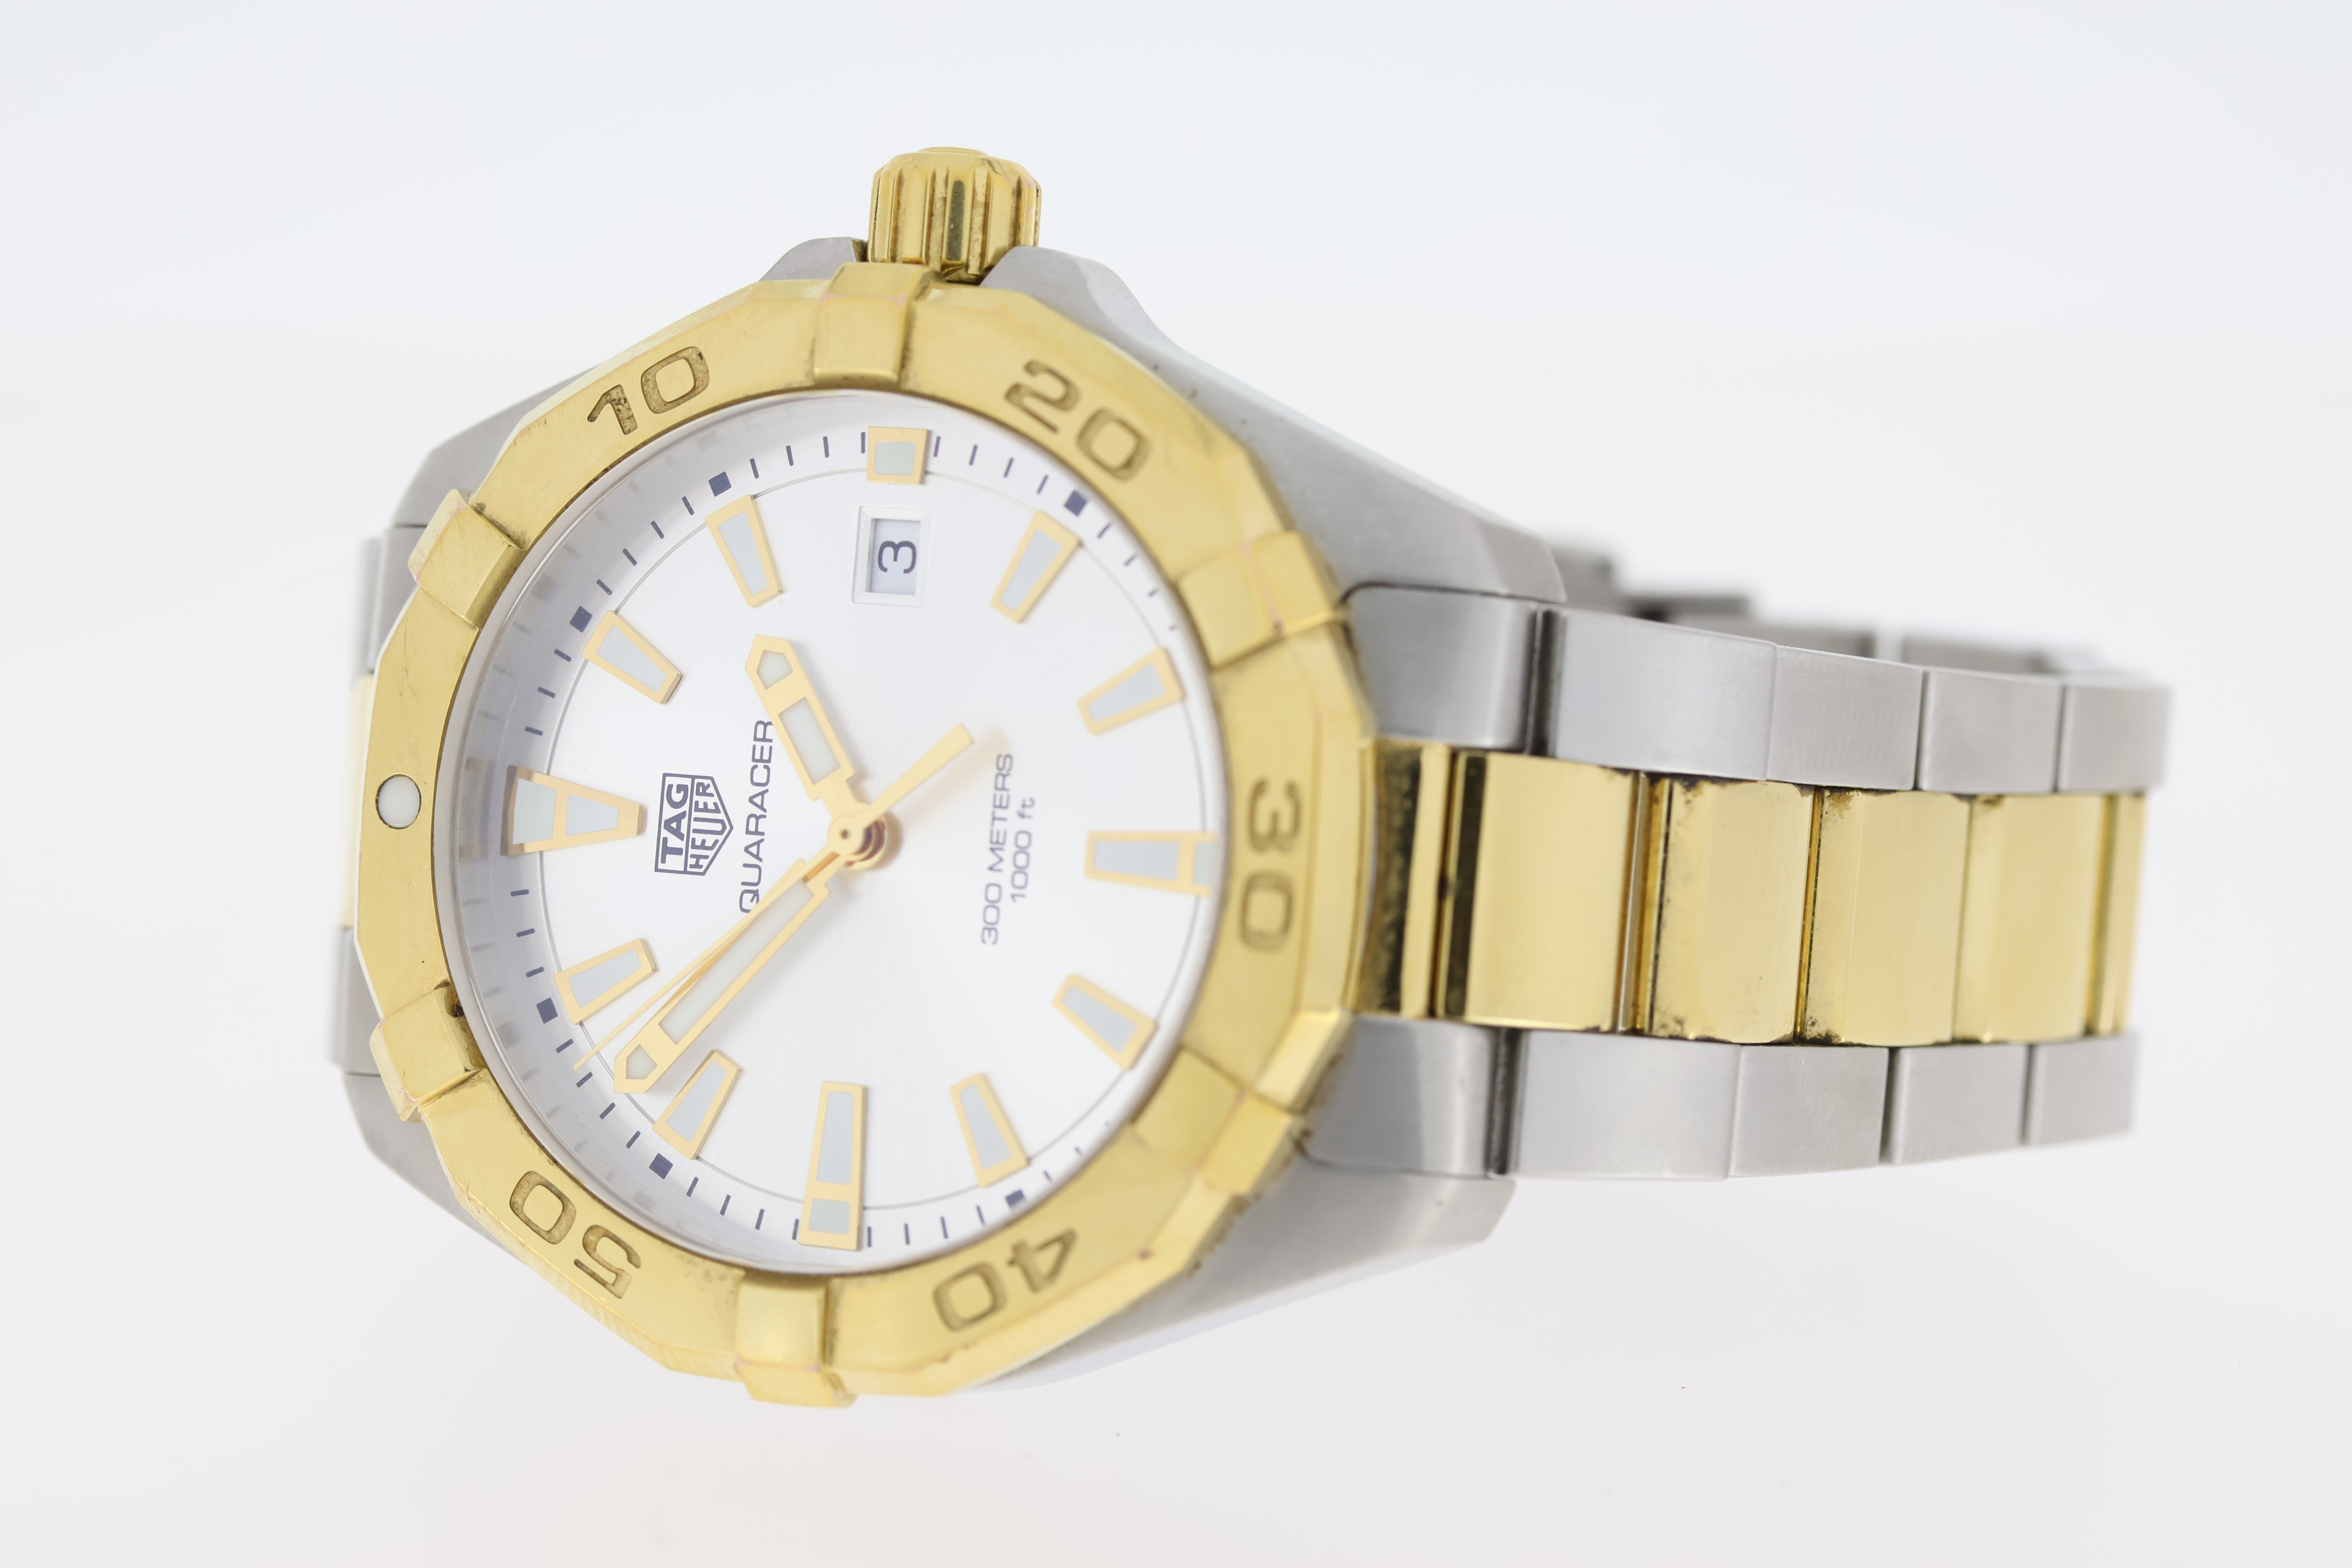 TAG HEUER AQUARACER 300M QUARTZ WATCH REFERENCE WBD1120, W/BOX AND PAPERS 2021. Approx 41mm - Image 6 of 9